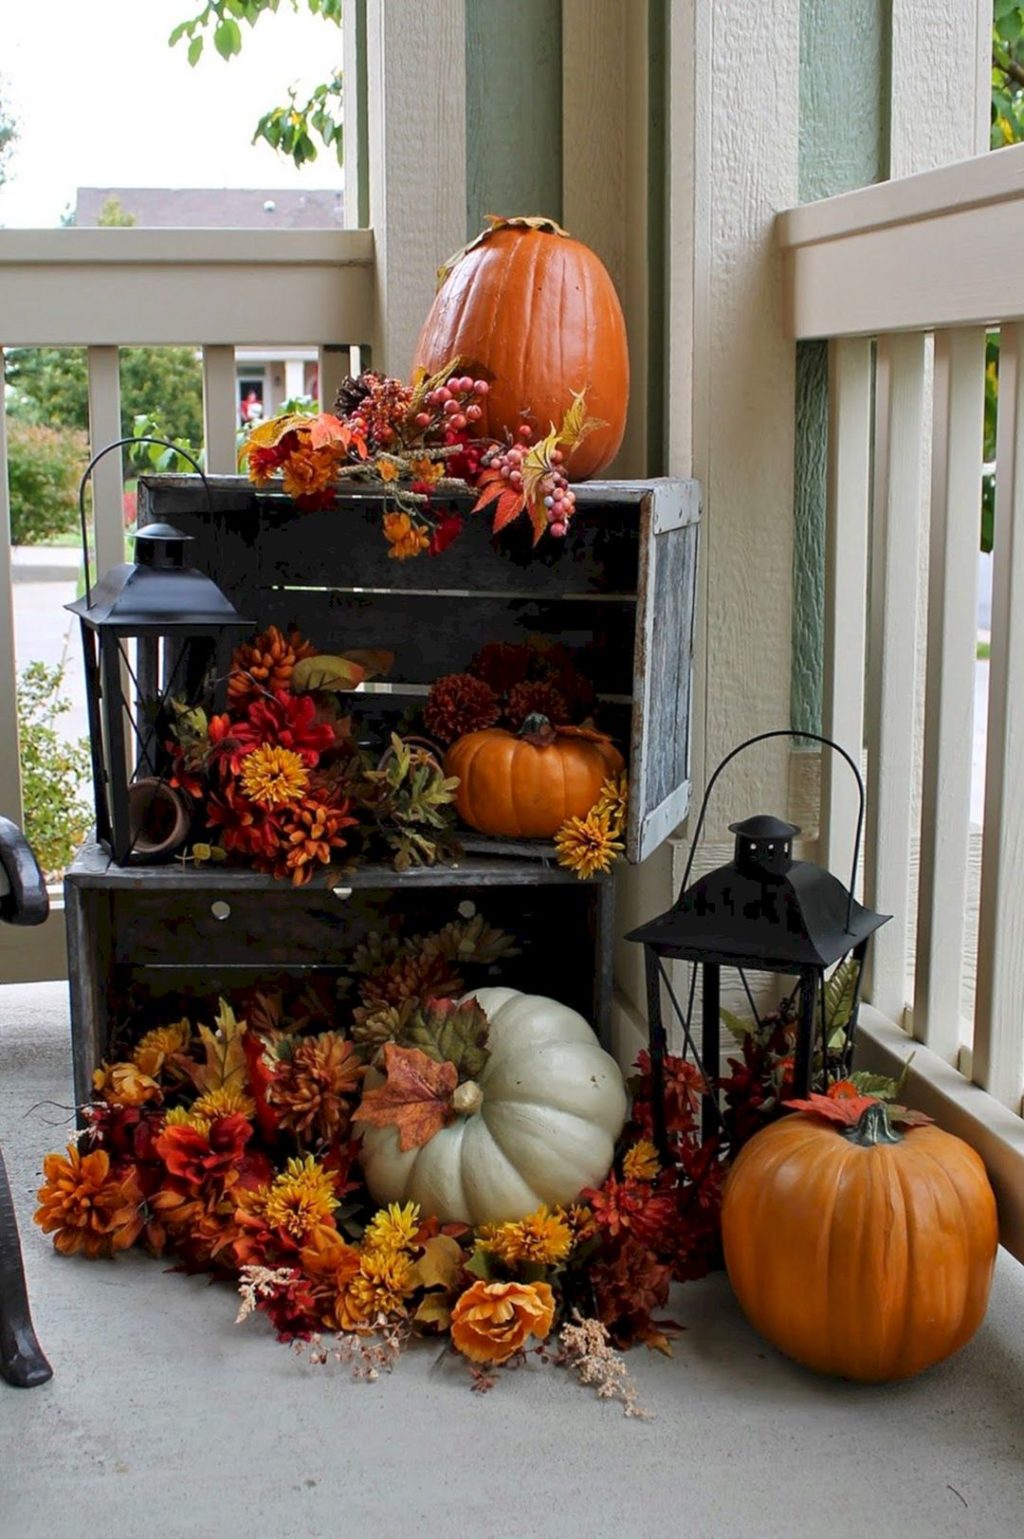 Best Fall Porch Decorating Ideas and Designs for 2021